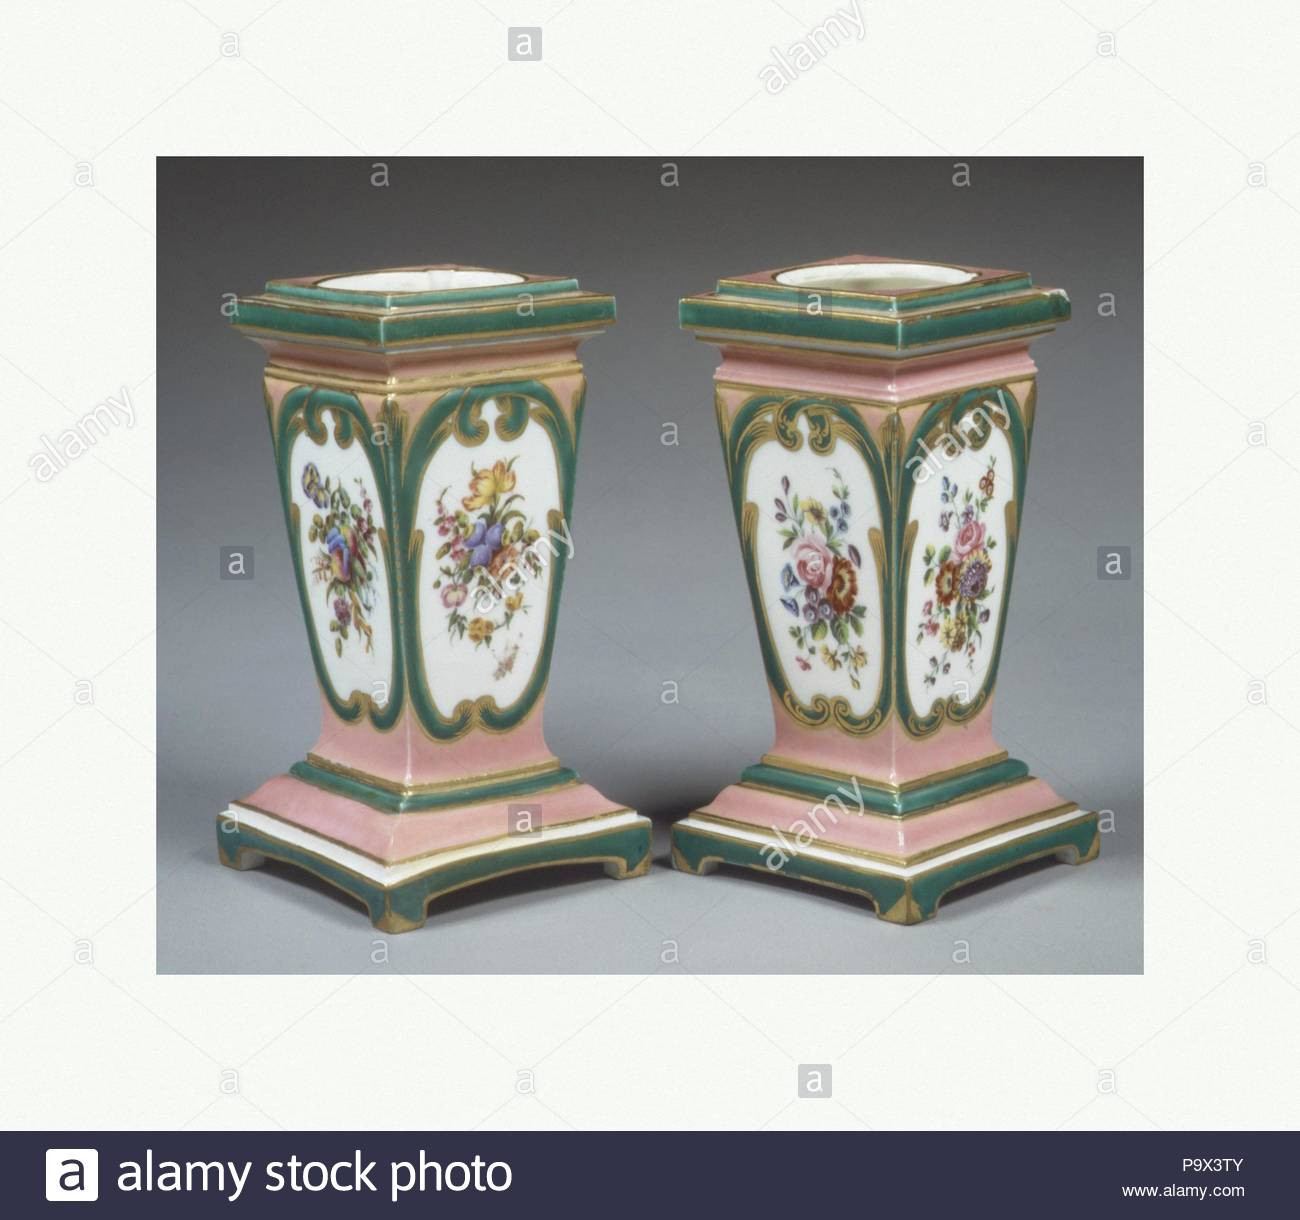 25 Awesome Pedestal Stands for Vases 2022 free download pedestal stands for vases of pedestal vase stock photos pedestal vase stock images page 2 alamy with pedestal vase and bulb pot piadestal en gaine one of a pair